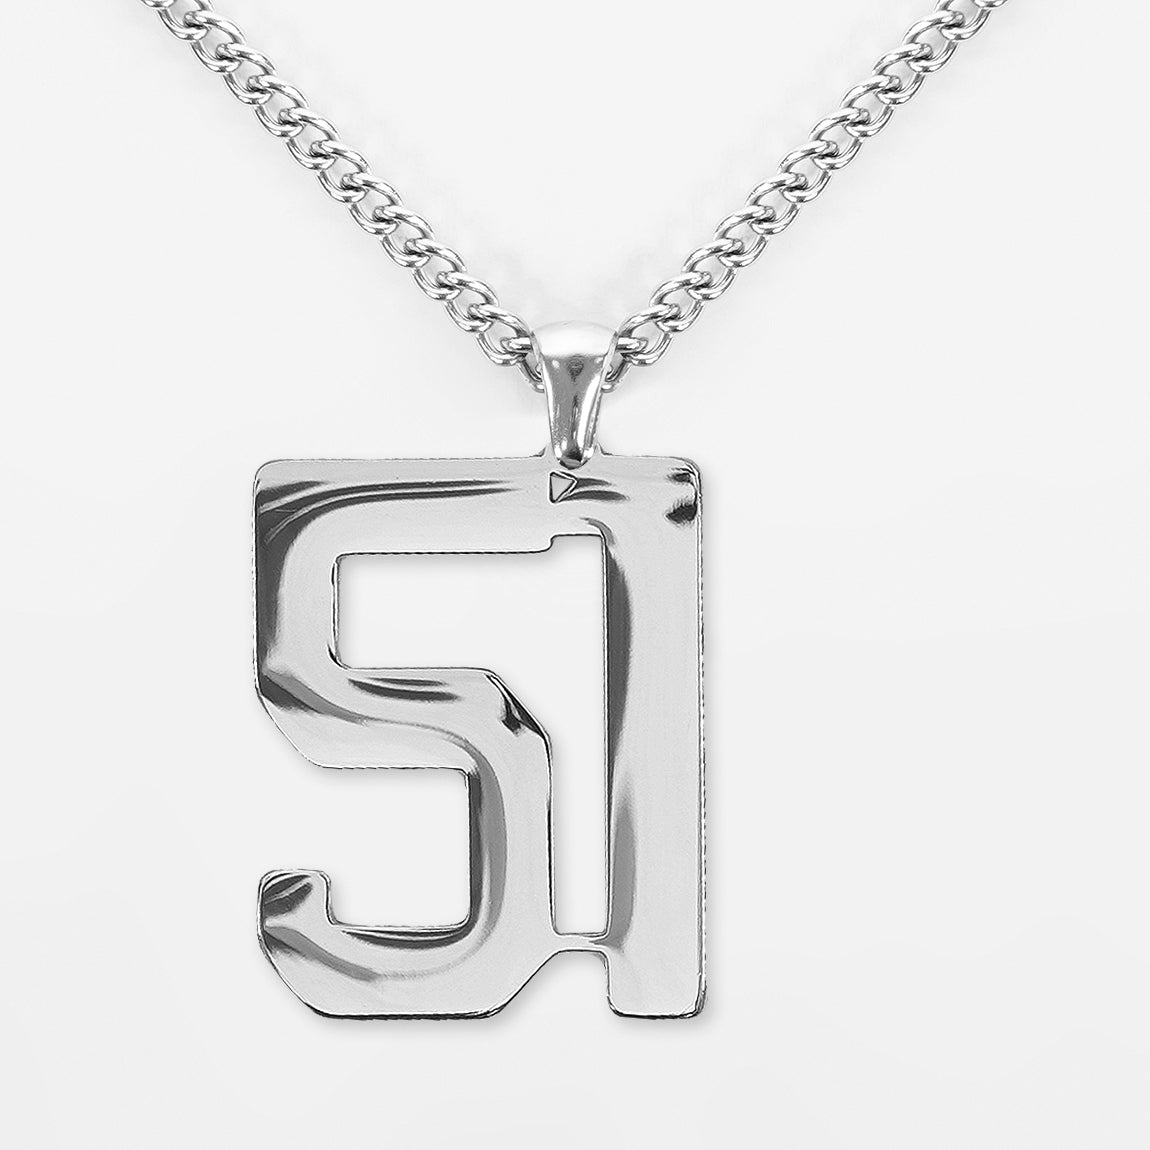 51 Number Pendant with Chain Necklace - Stainless Steel